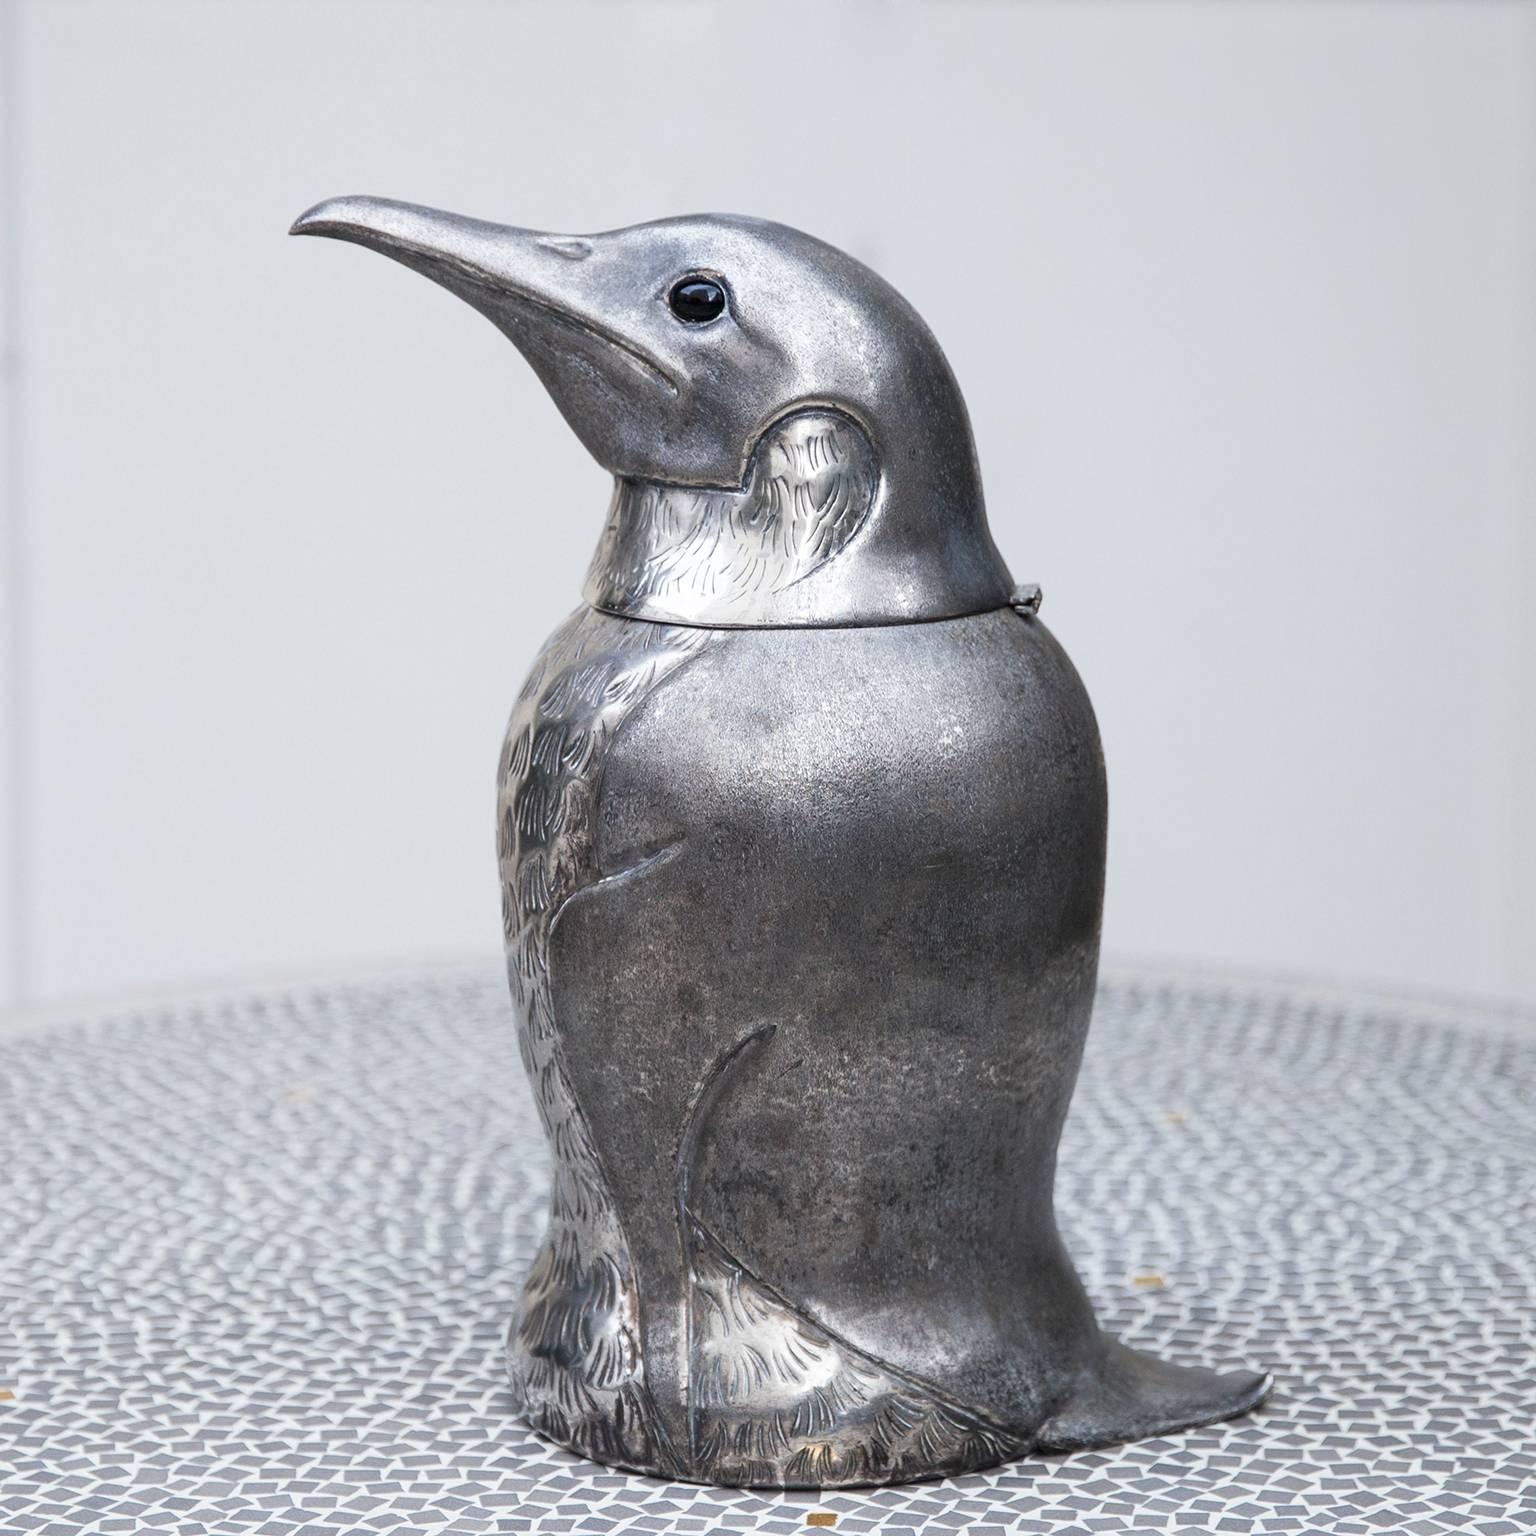 Wonderful penguin ice bucket or wine cooler attributed to Franco Lapini, Florence, Italy, 1970s. The penguin is made of silver plated metal with a glass eyes and a metal inlay.
A 